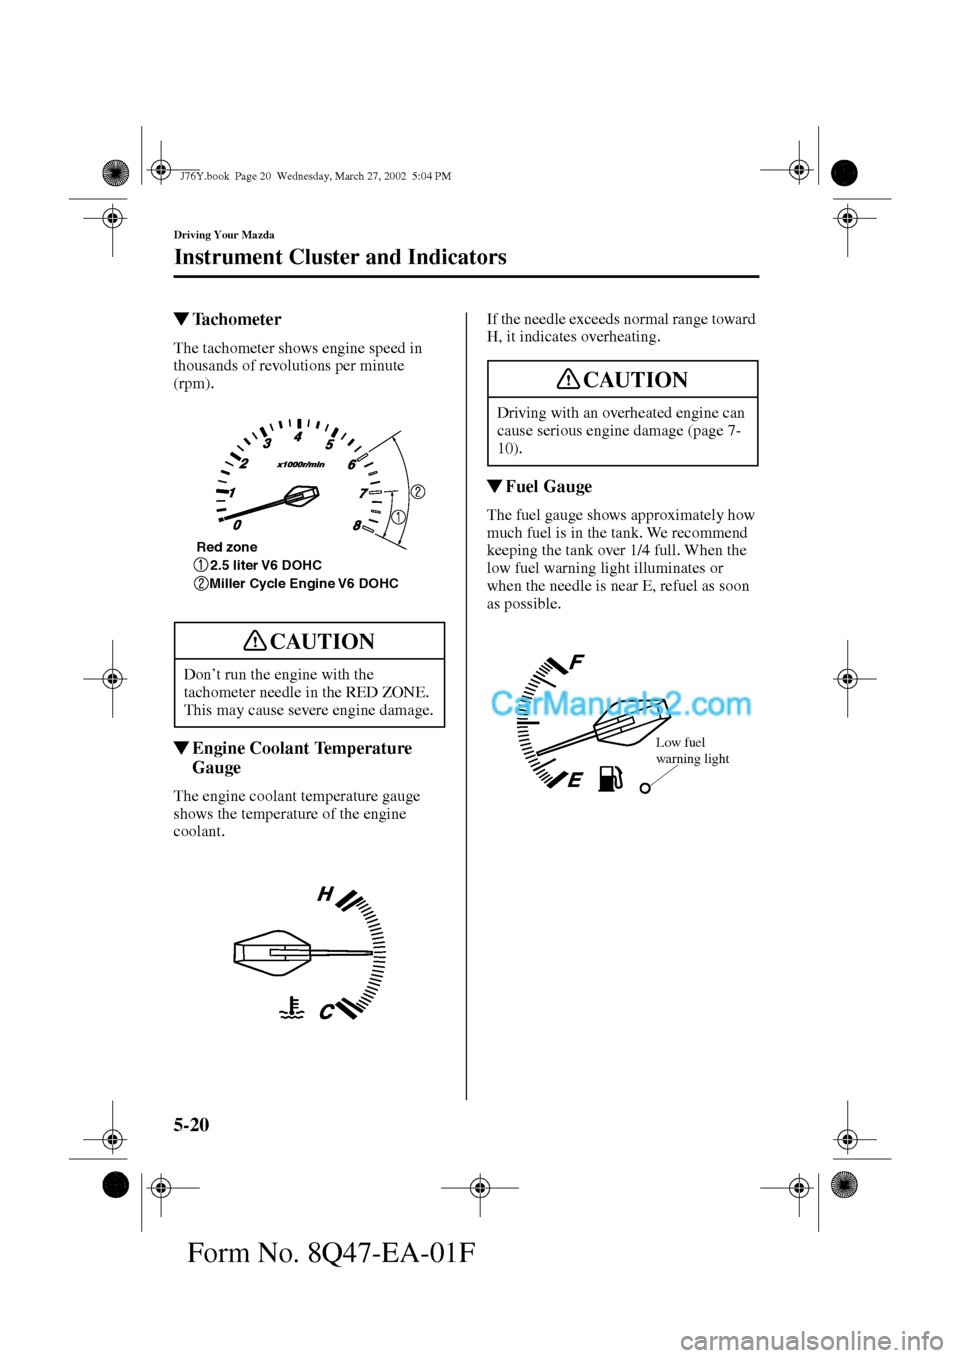 MAZDA MODEL MILLENIA 2002   (in English) Owners Guide 5-20
Driving Your Mazda
Instrument Cluster and Indicators
Form No. 8Q47-EA-01F
Tachometer
The tachometer shows engine speed in 
thousands of revolutions per minute 
(rpm).
Engine Coolant Temperature